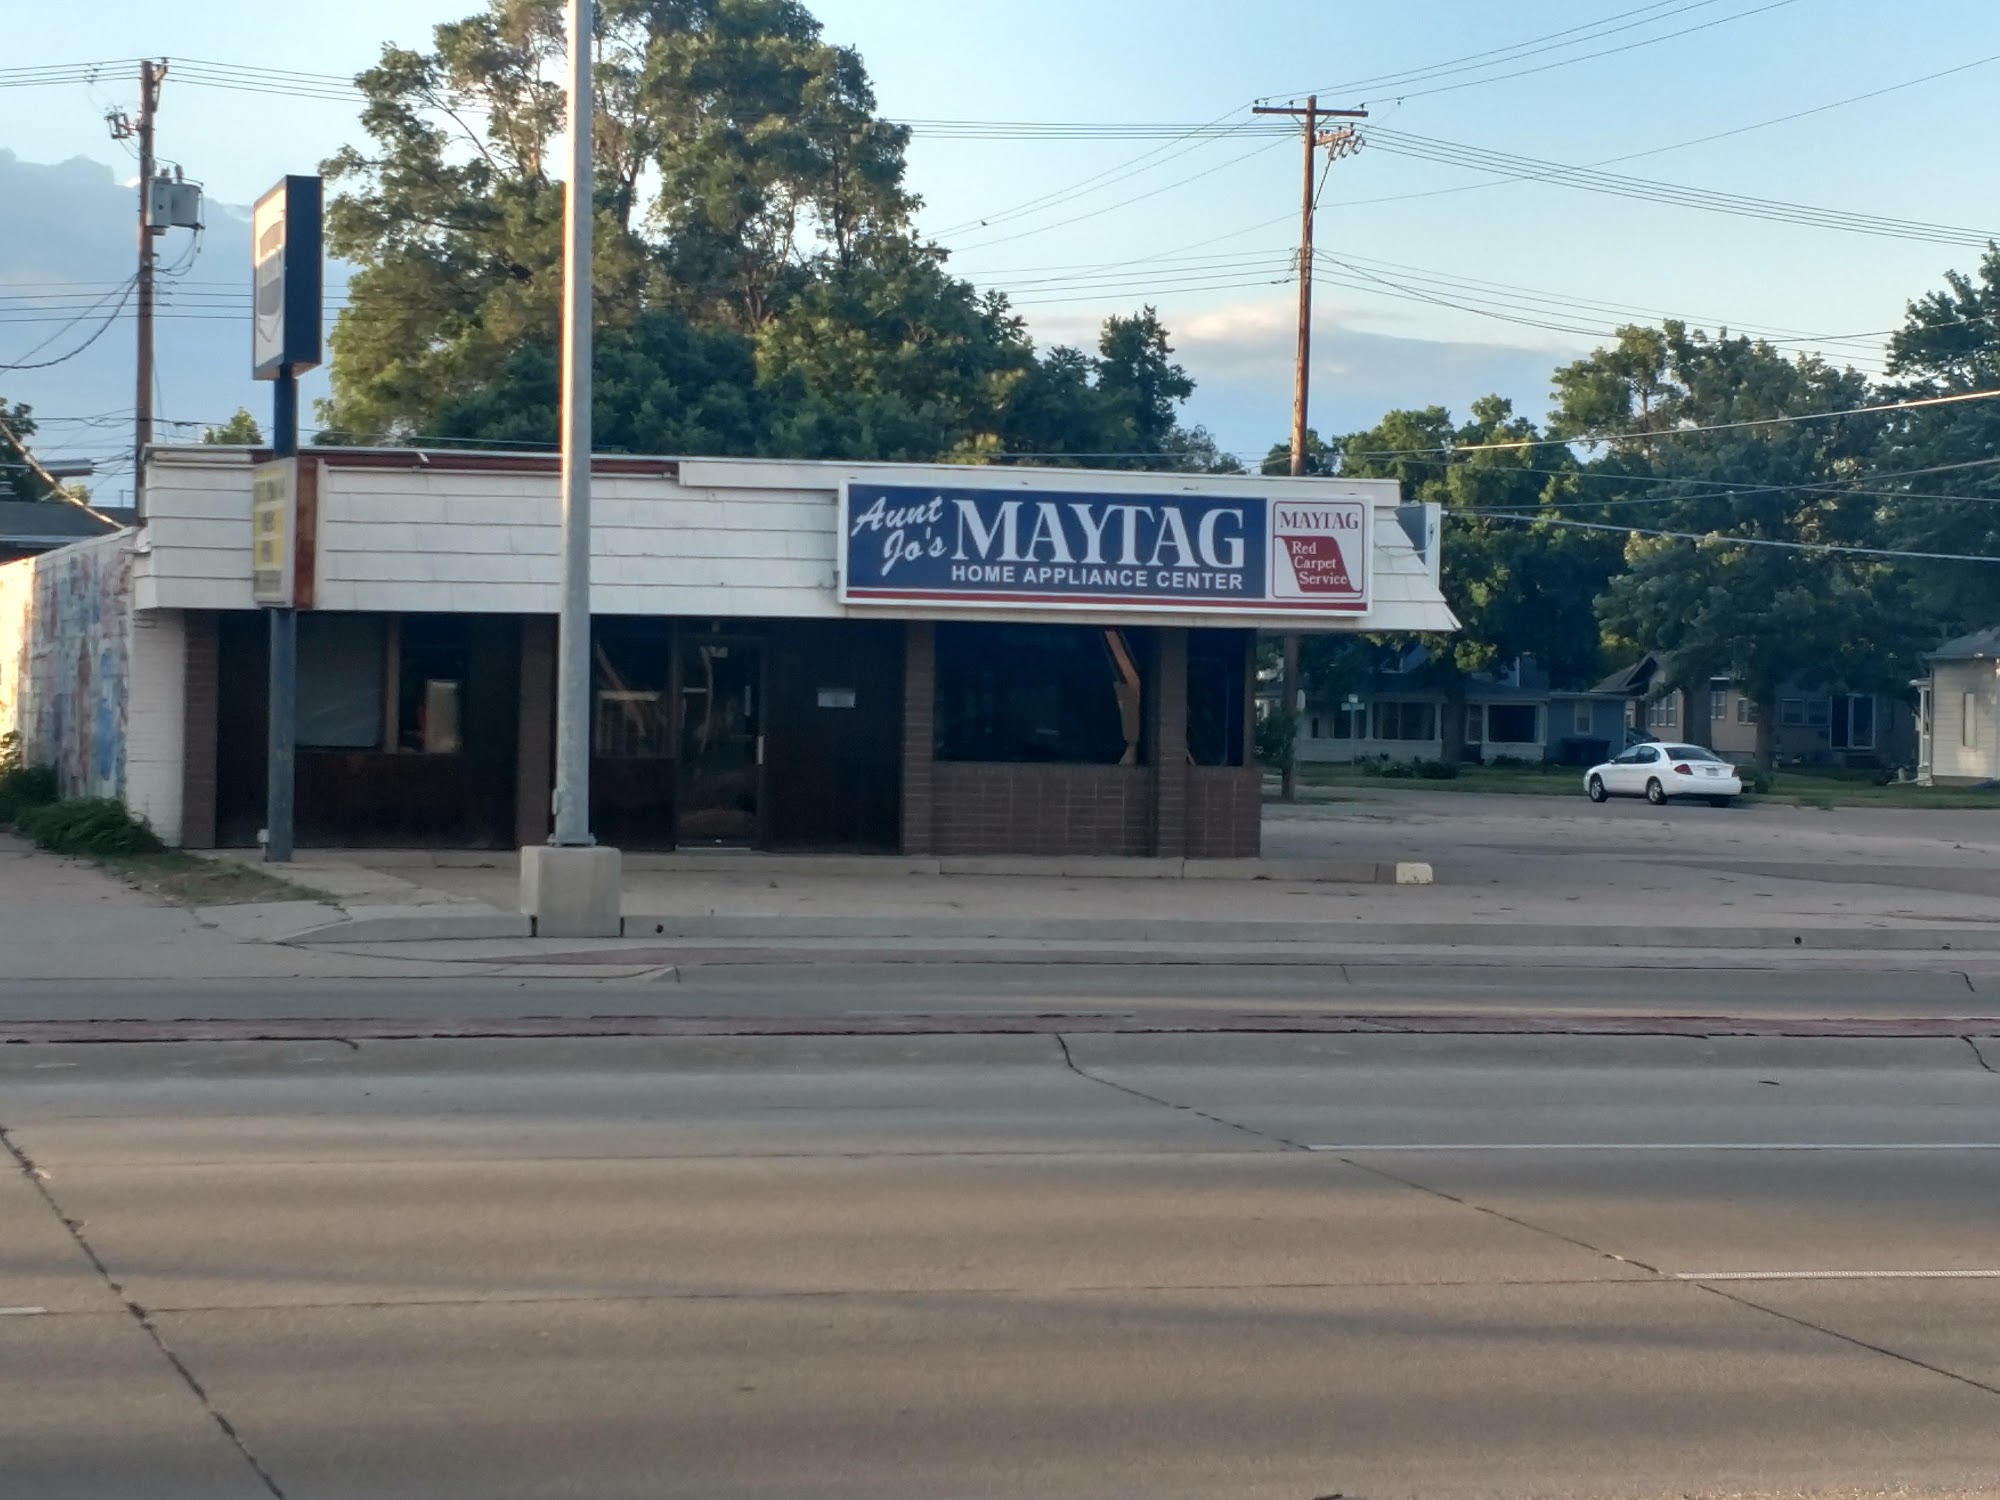 Aunt Jo's Maytag-Home Appliance Center